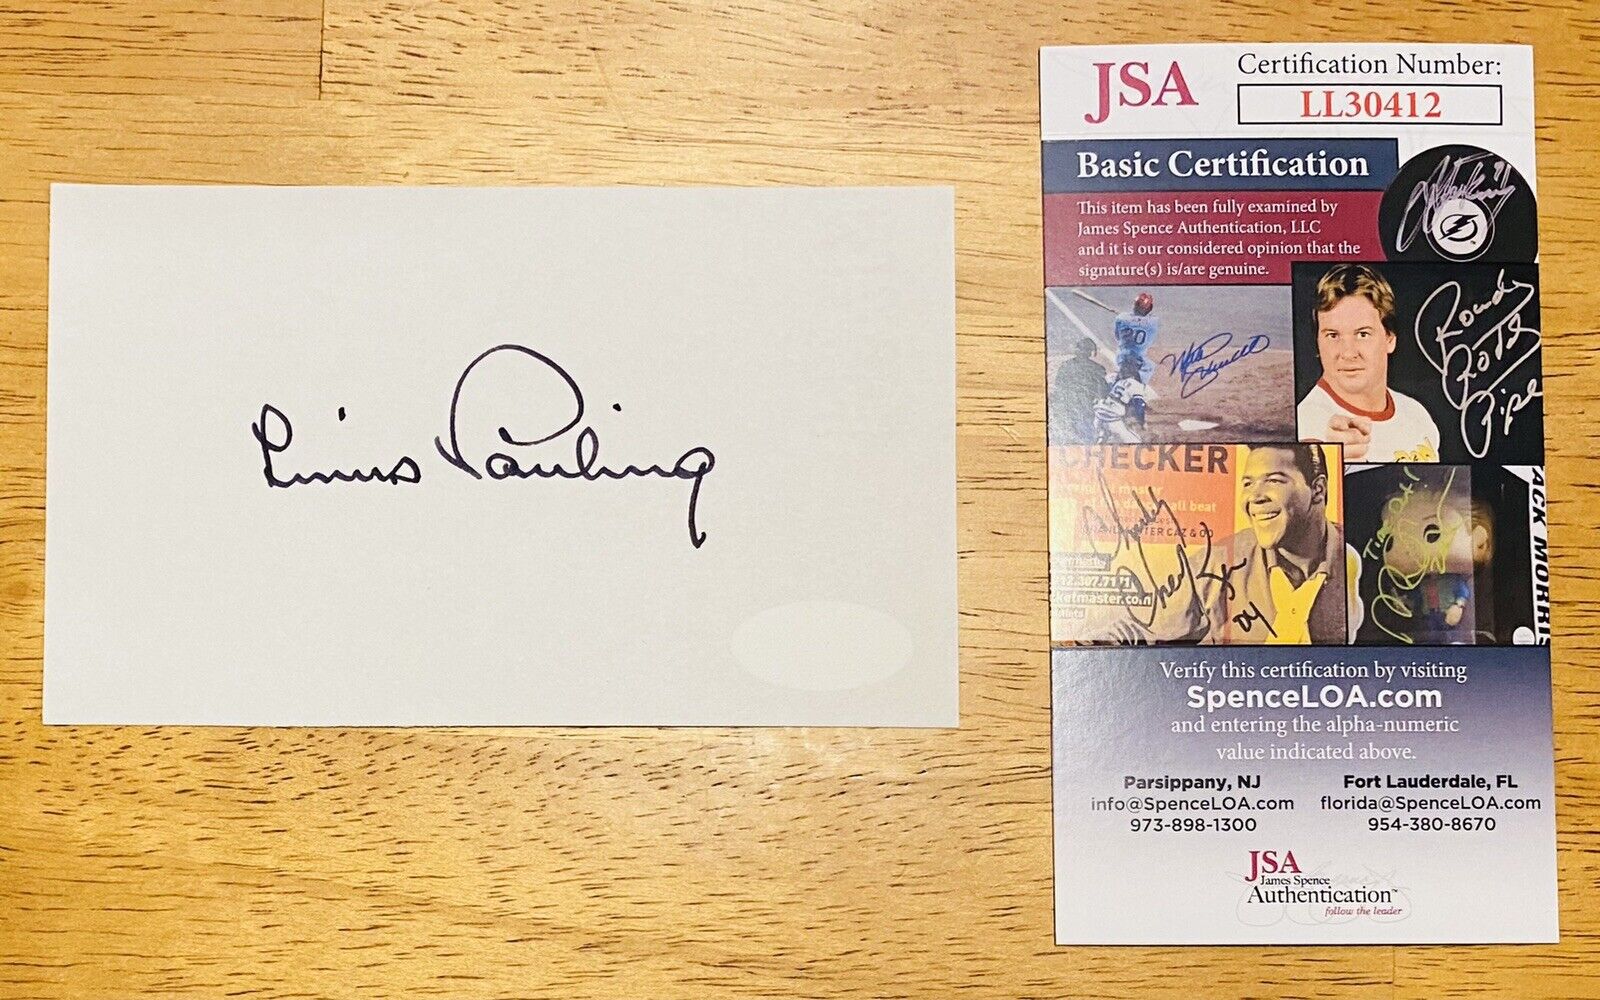 Linus Pauling Signed Autographed 3x5 Page JSA Certified Nobel Prize Chemistry